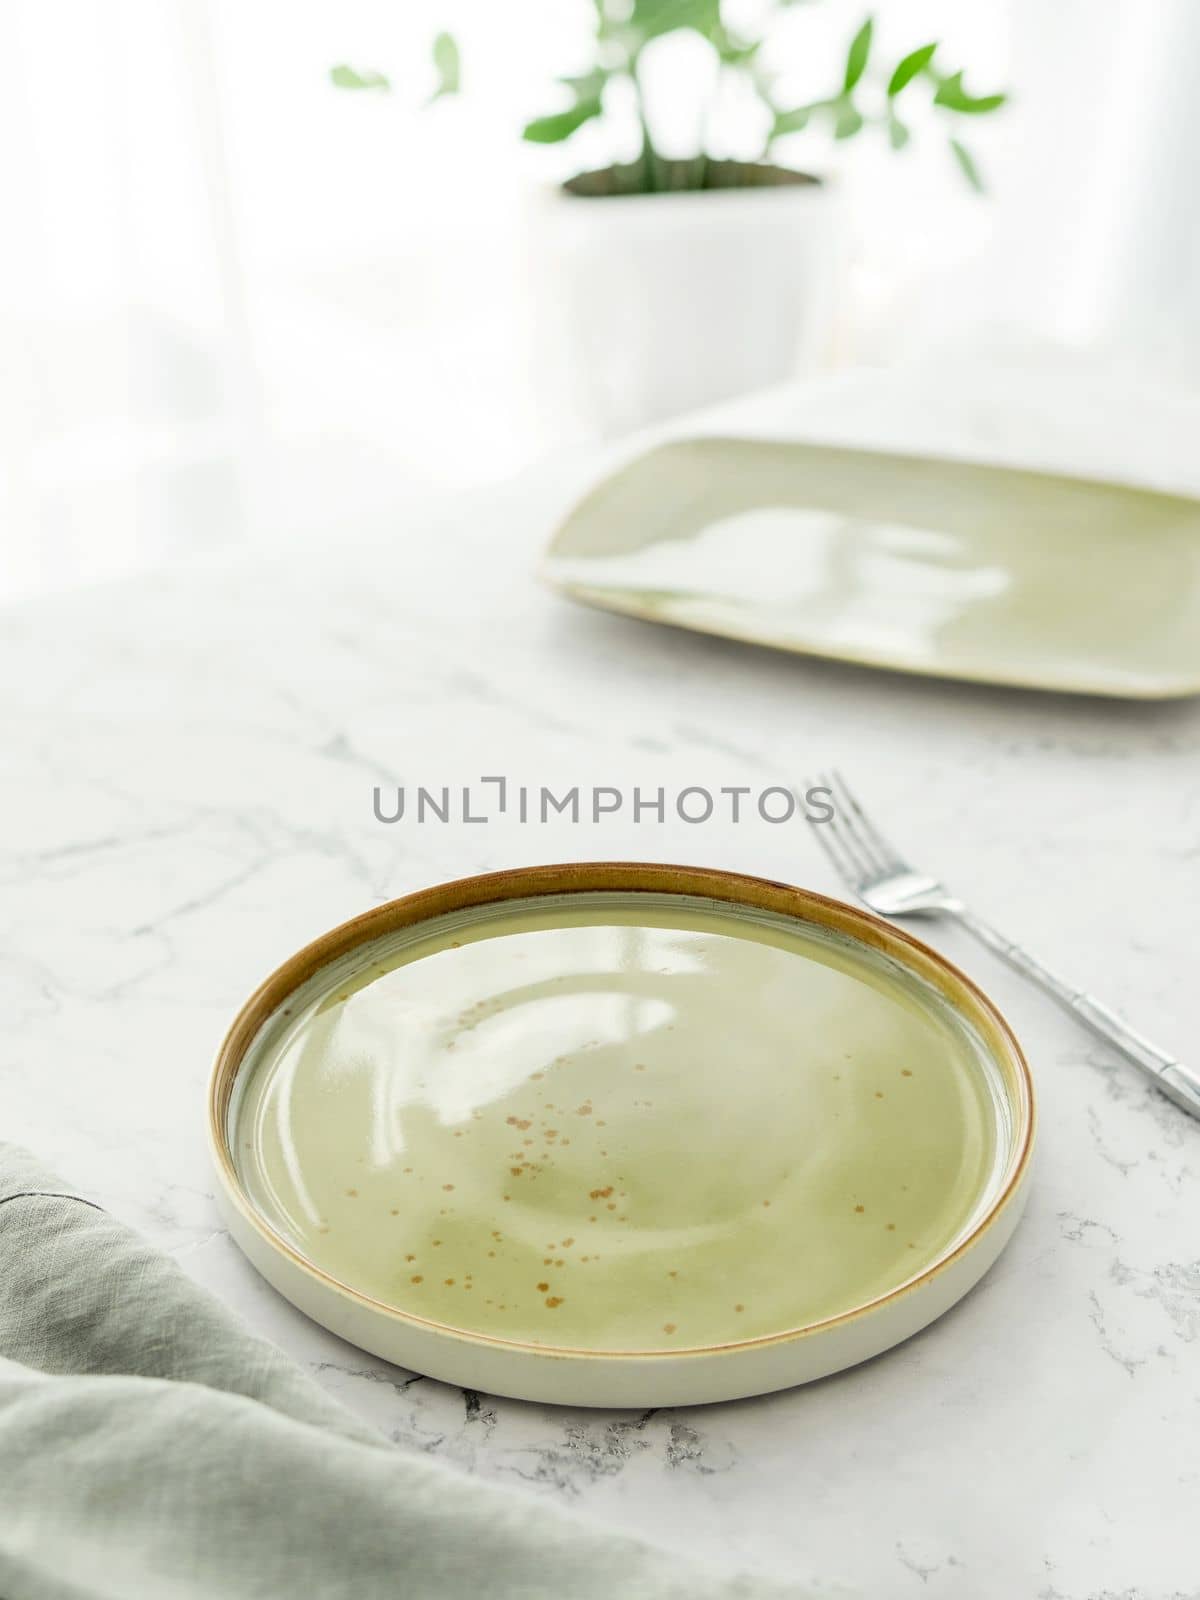 Empty green plate with tablecloth and fork on white marble table by dmitryz